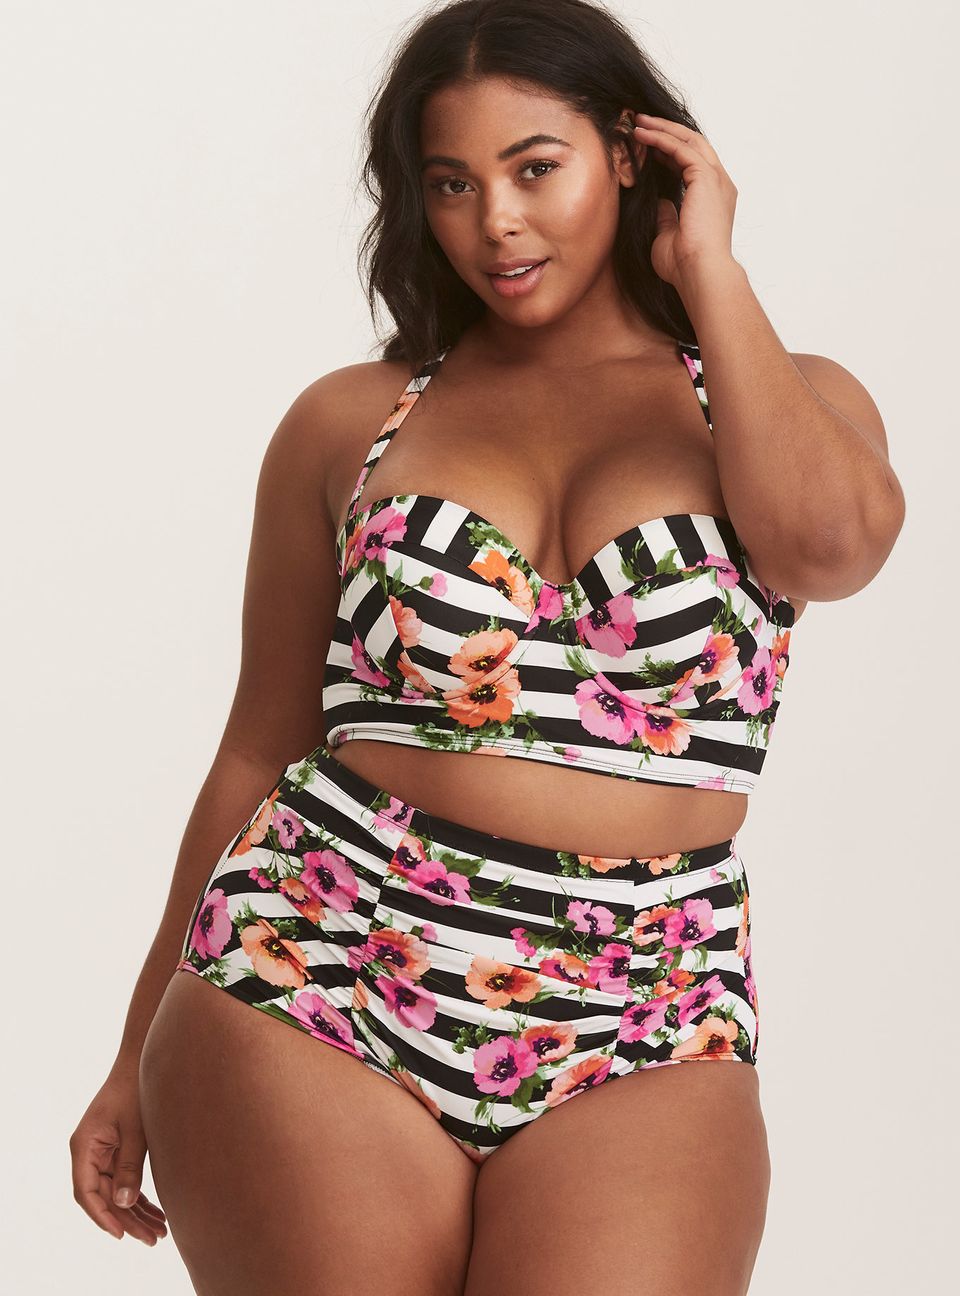 These Stunning Plus Size Swimsuits With Underwire Are Here To Lift You